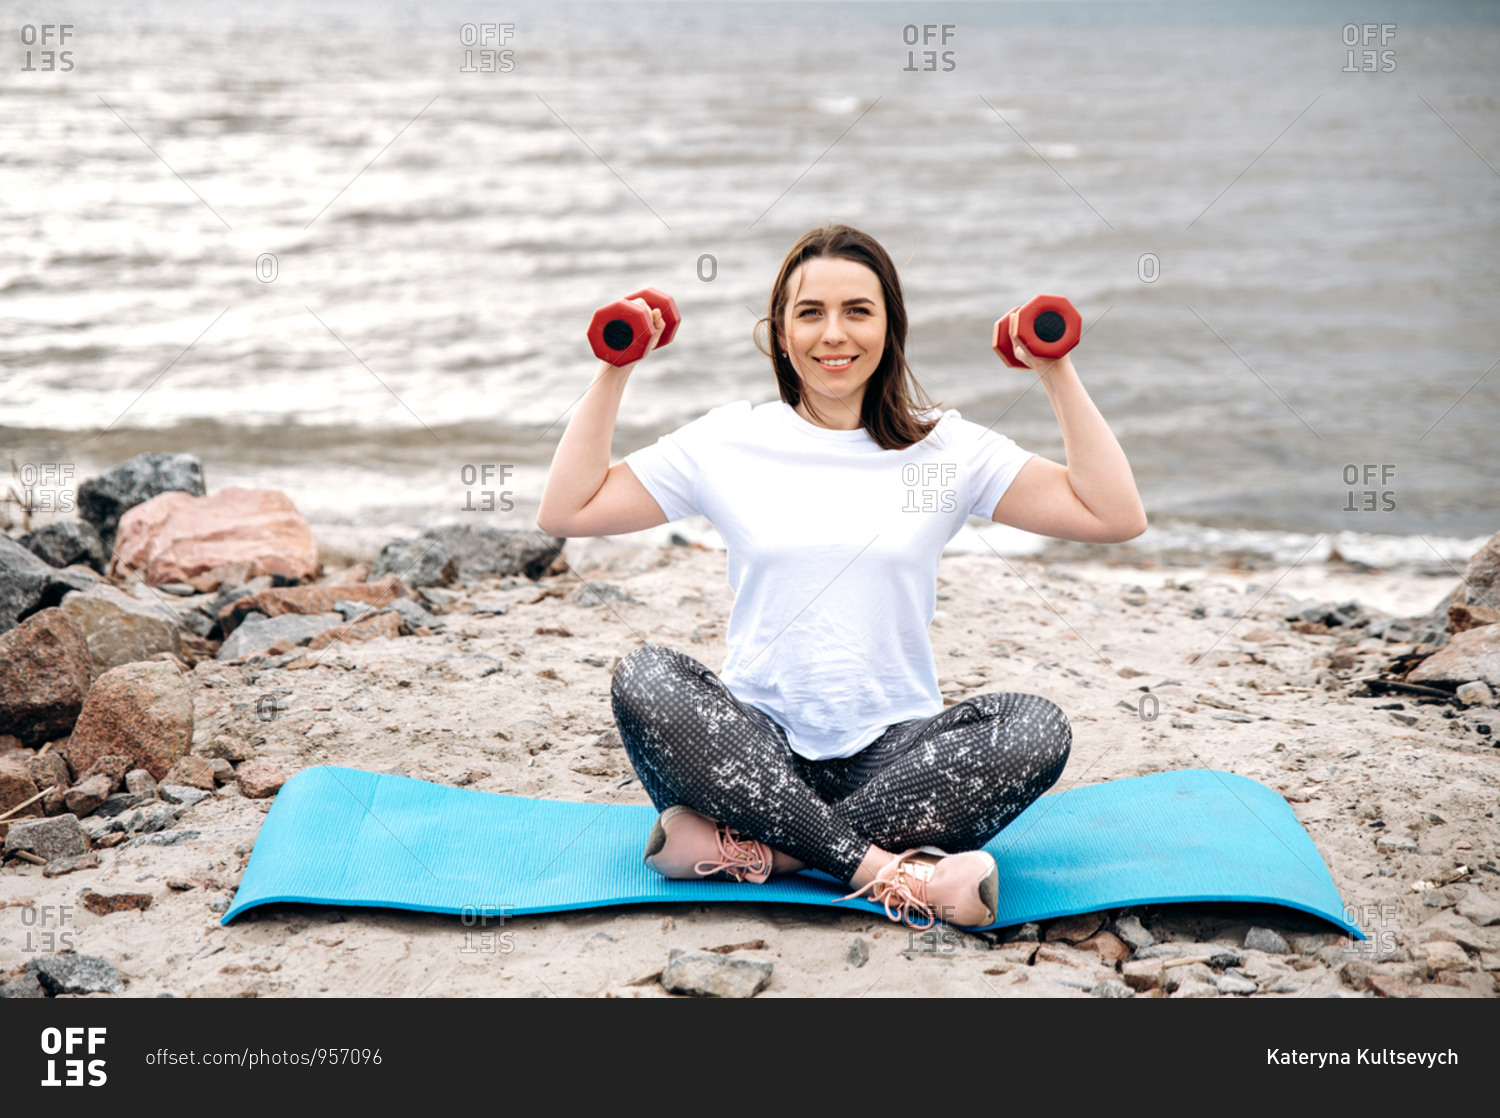 Outdoor workout. Young caucasian smiling girl gets fit. She sits on a mat in sportswear and doing exercises with dumbbells in a good mood